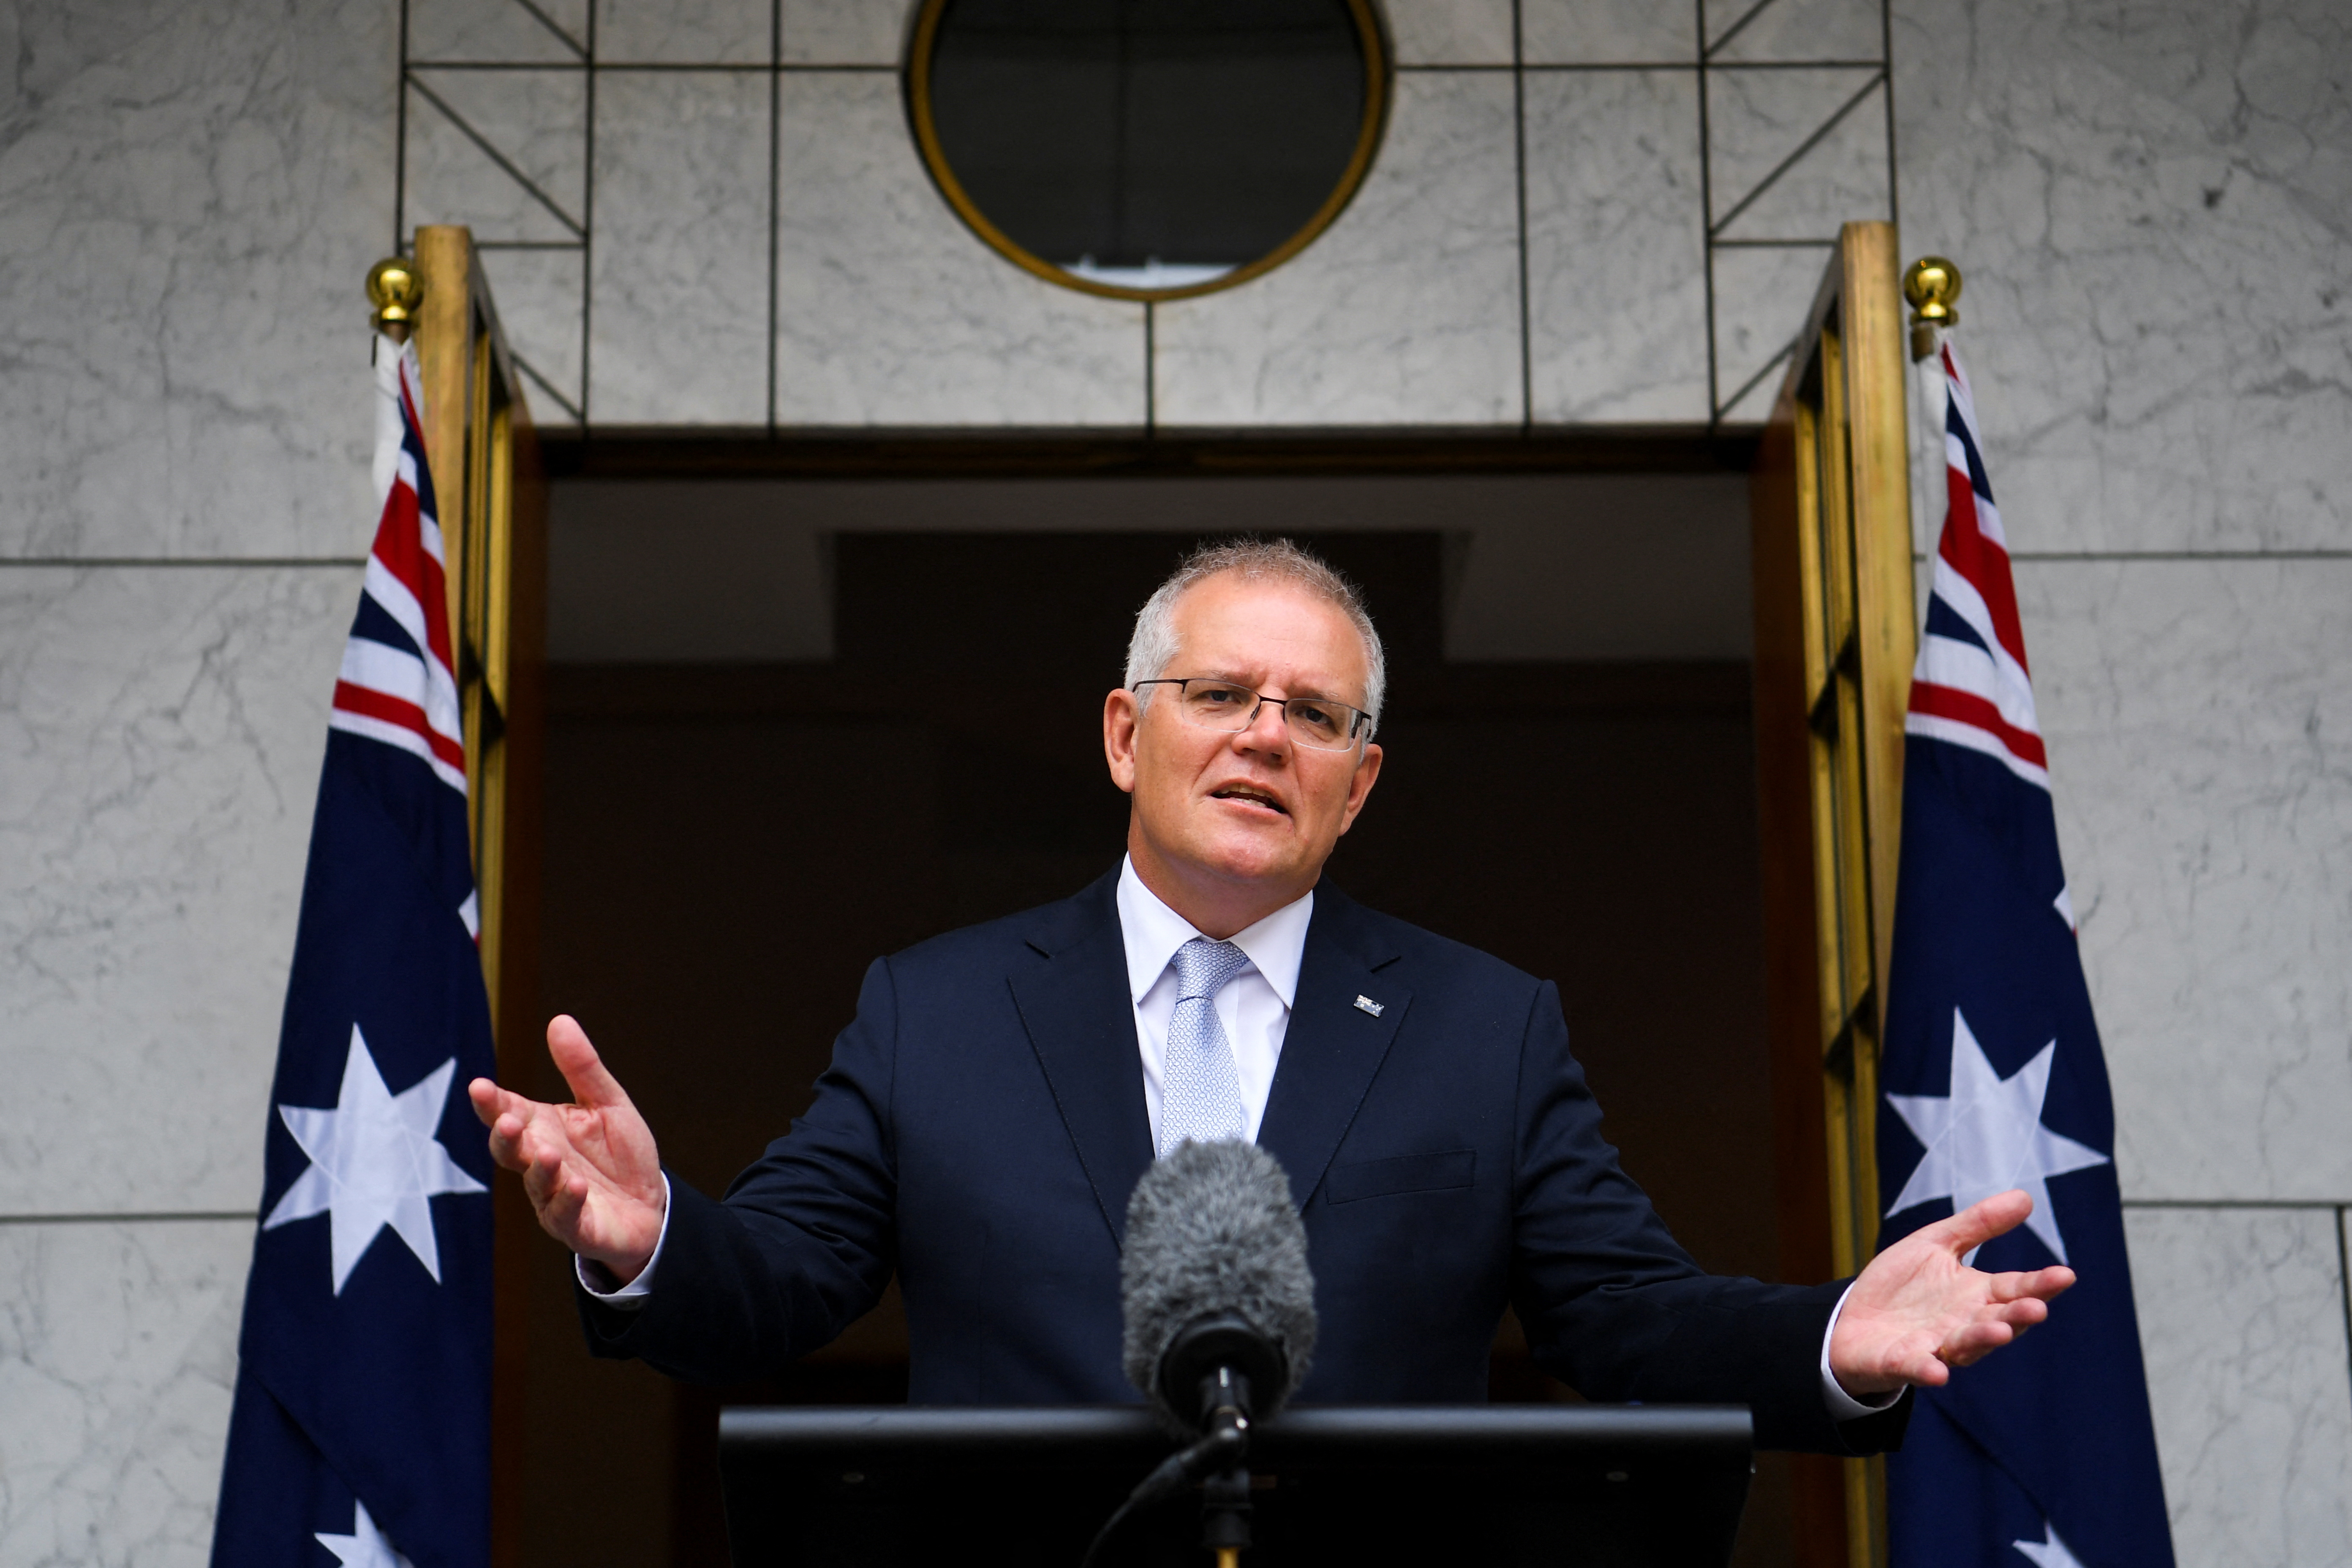 Australian Prime Minister Scott Morrison speaks during a news conference at Parliament House, in Canberra, Australia January 6, 2022. AAP Image/Lukas Coch via REUTERS  ATTENTION EDITORS - THIS IMAGE WAS PROVIDED BY A THIRD PARTY. NO RESALES. NO ARCHIVE. AUSTRALIA OUT. NEW ZEALAND OUT